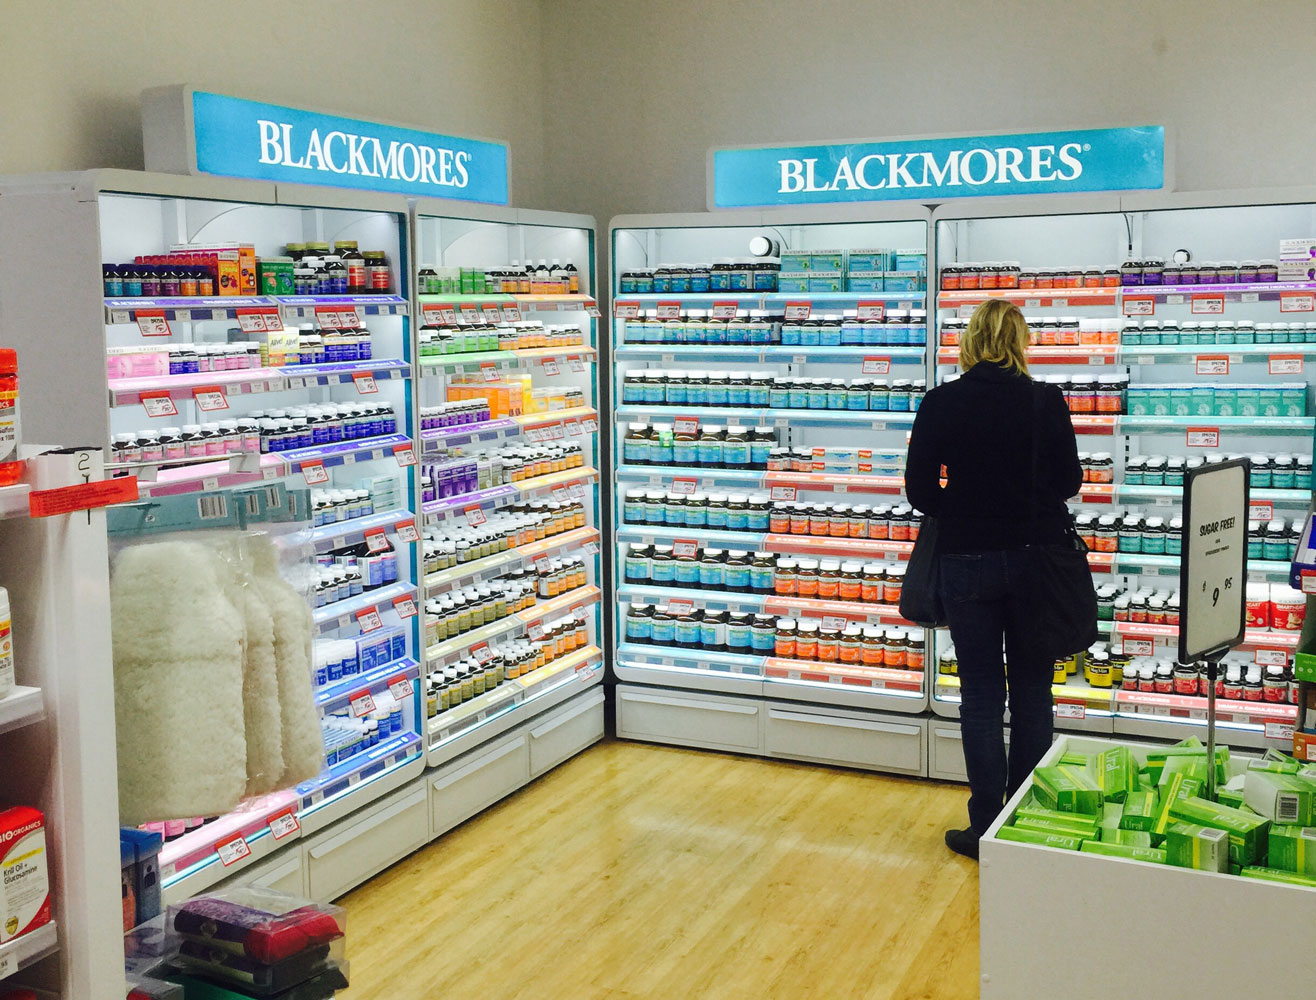 Blackmores retail product display with customer standing in front